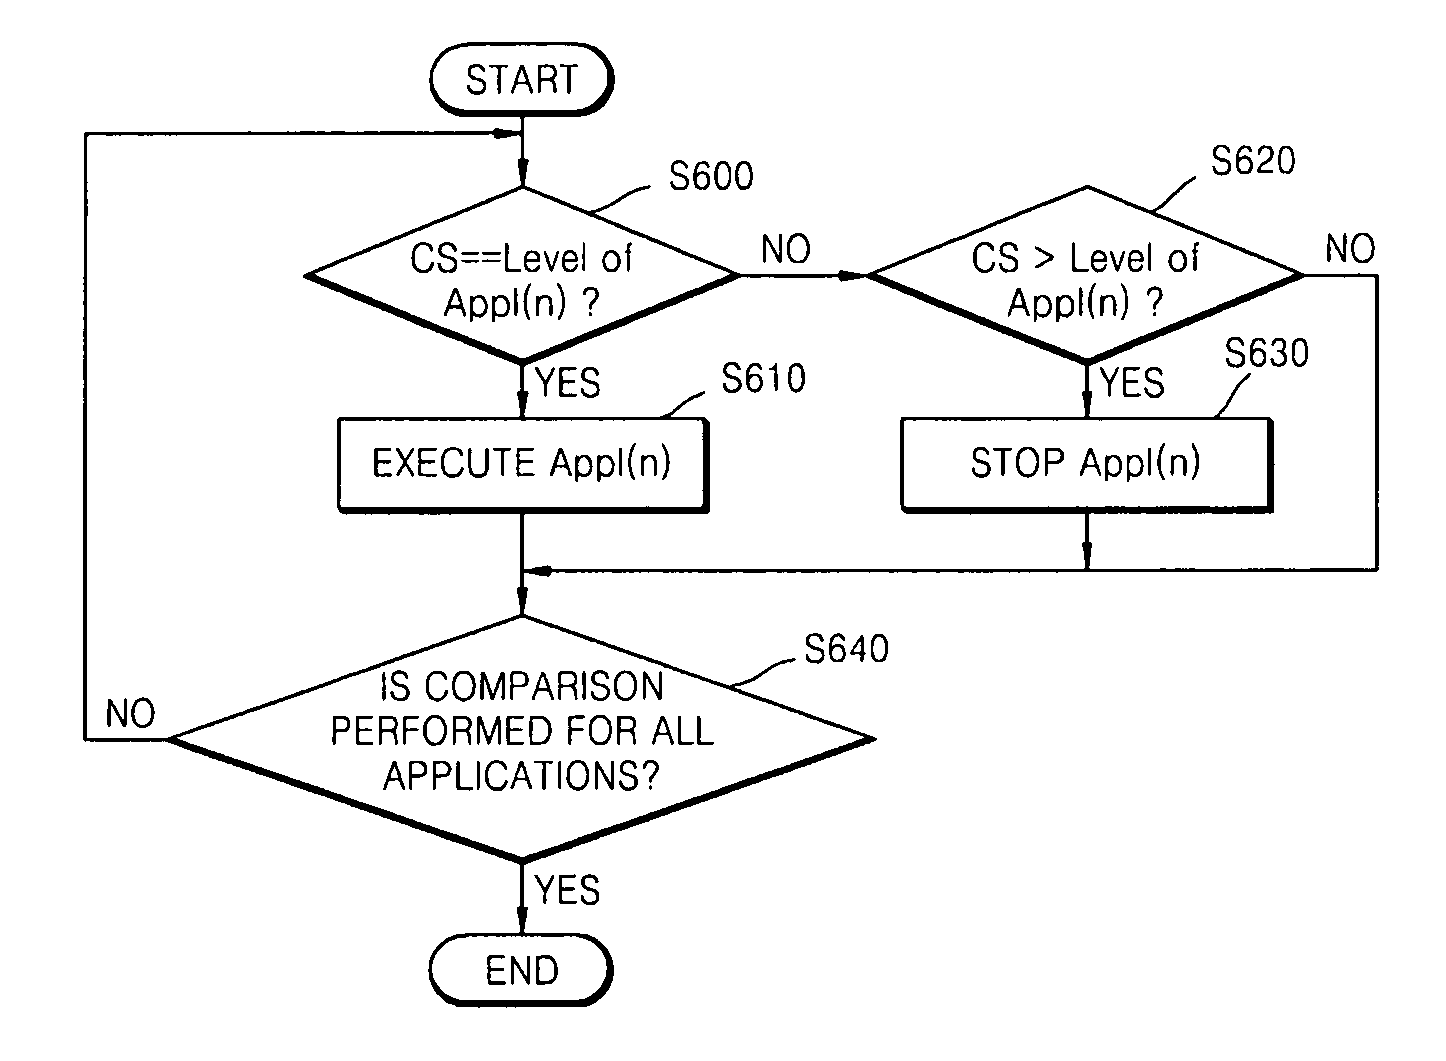 Apparatus and method of managing telematics application based on vehicle status